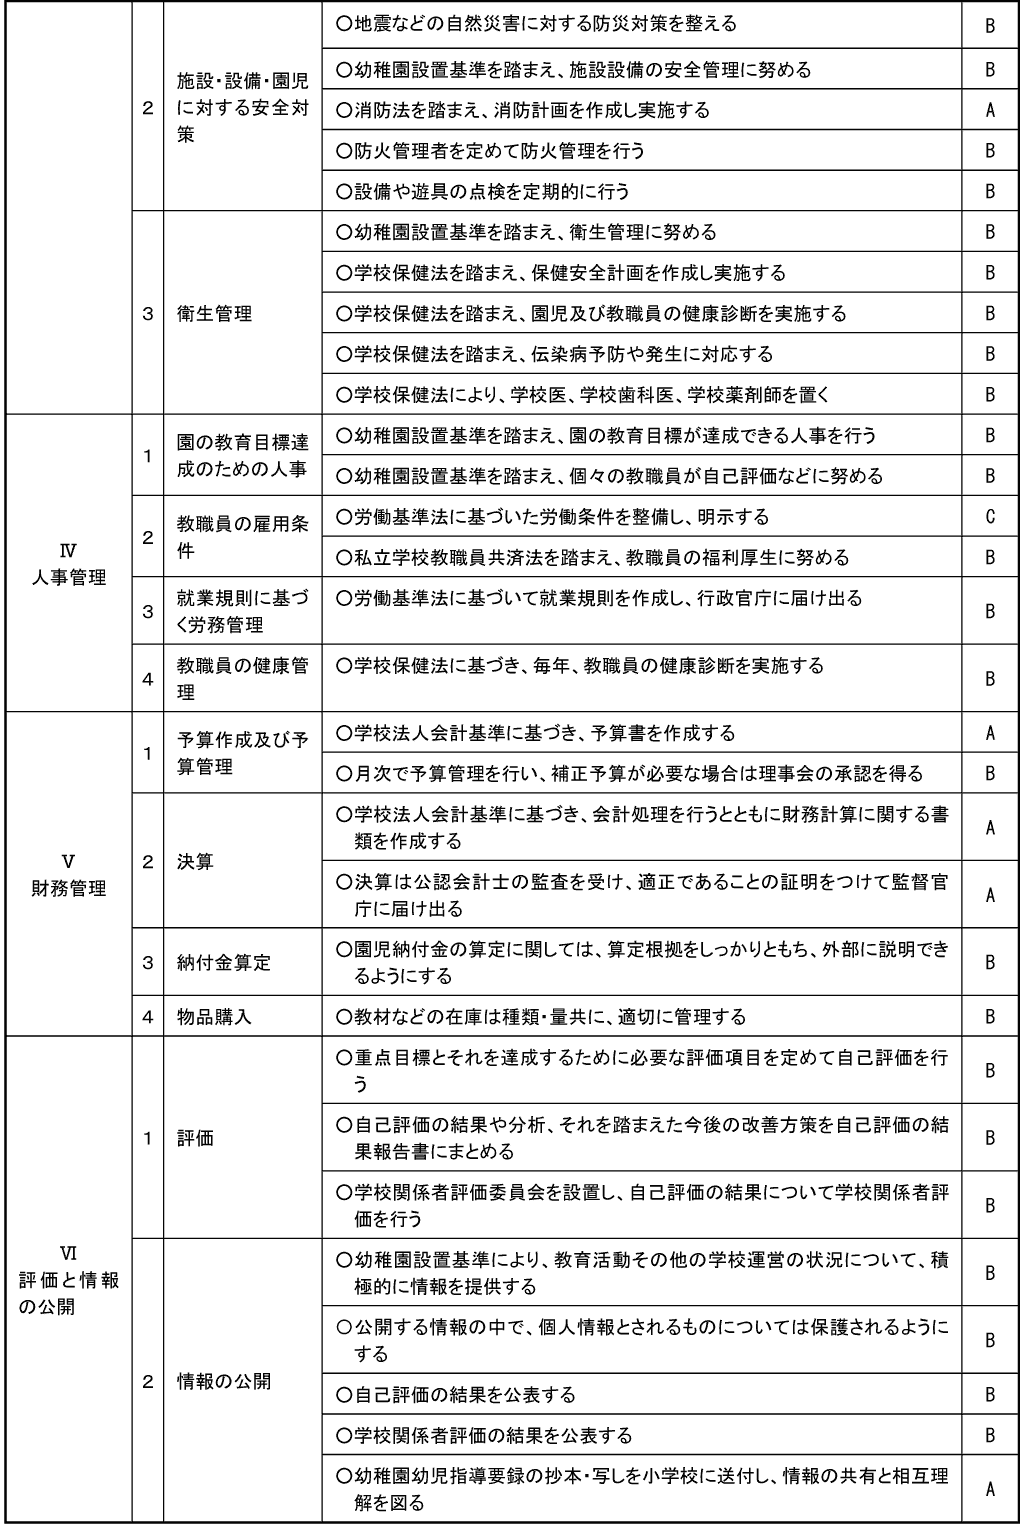 20130430_2.png